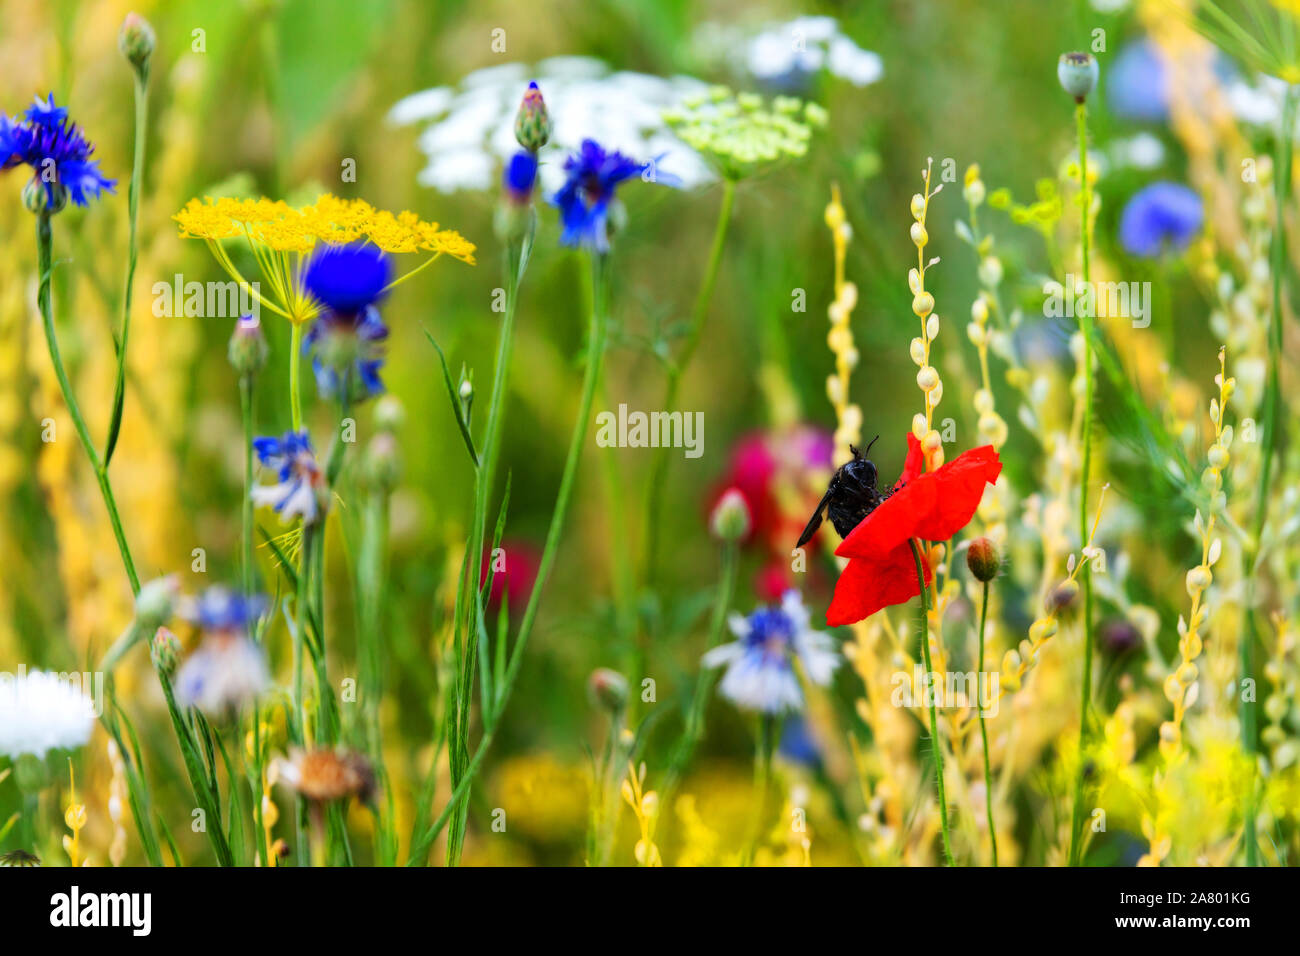 Wild herbs and flowers growing up at the spring season, native wildflowers in the own garden Stock Photo